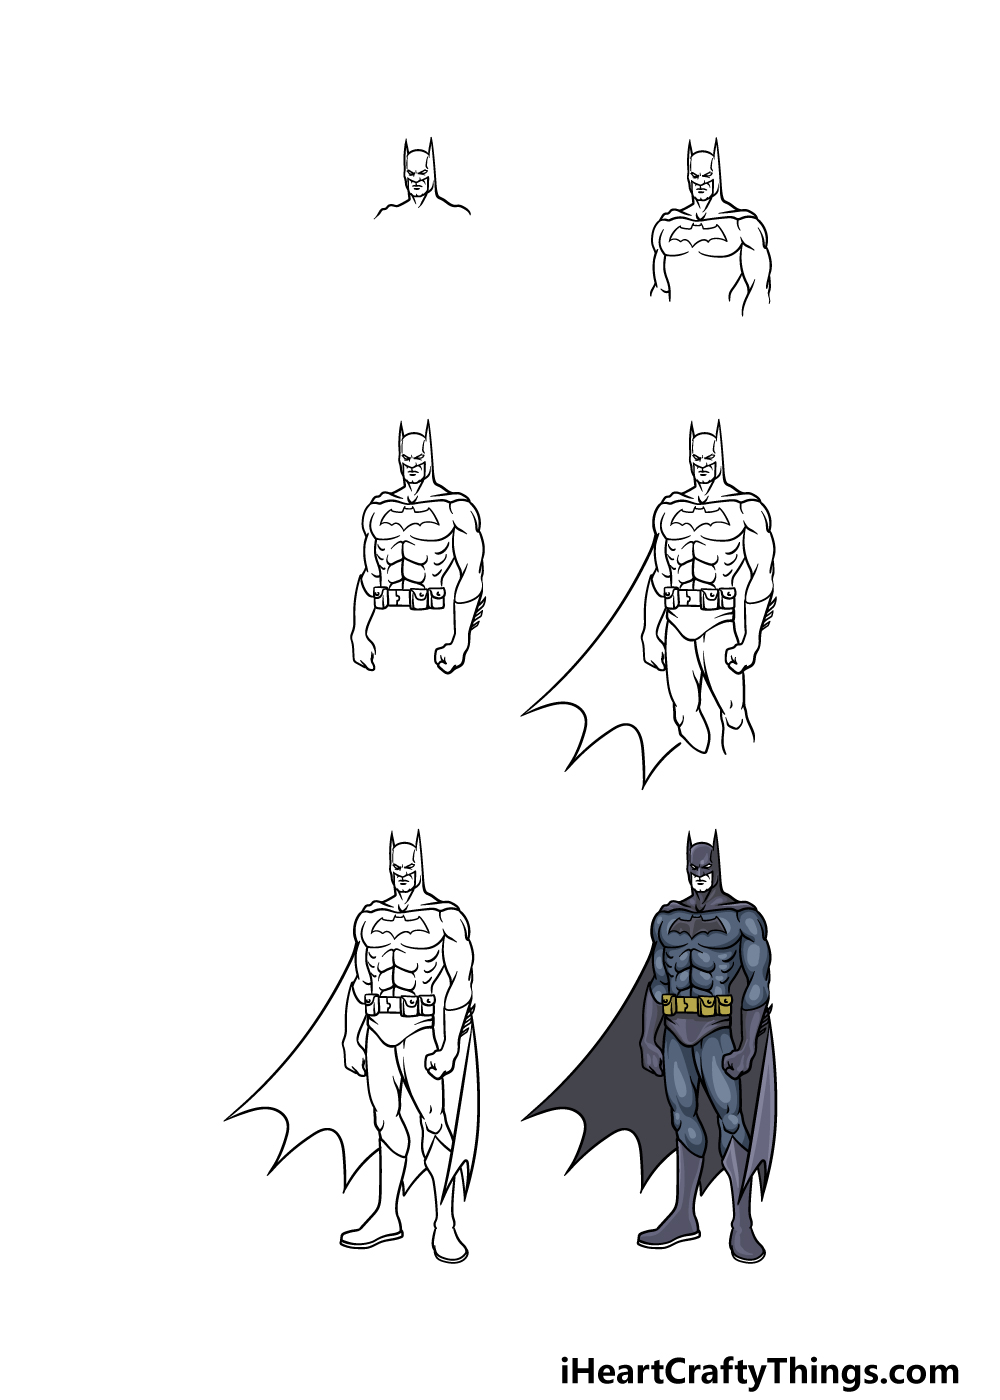 how to draw Batman in 6 easy steps